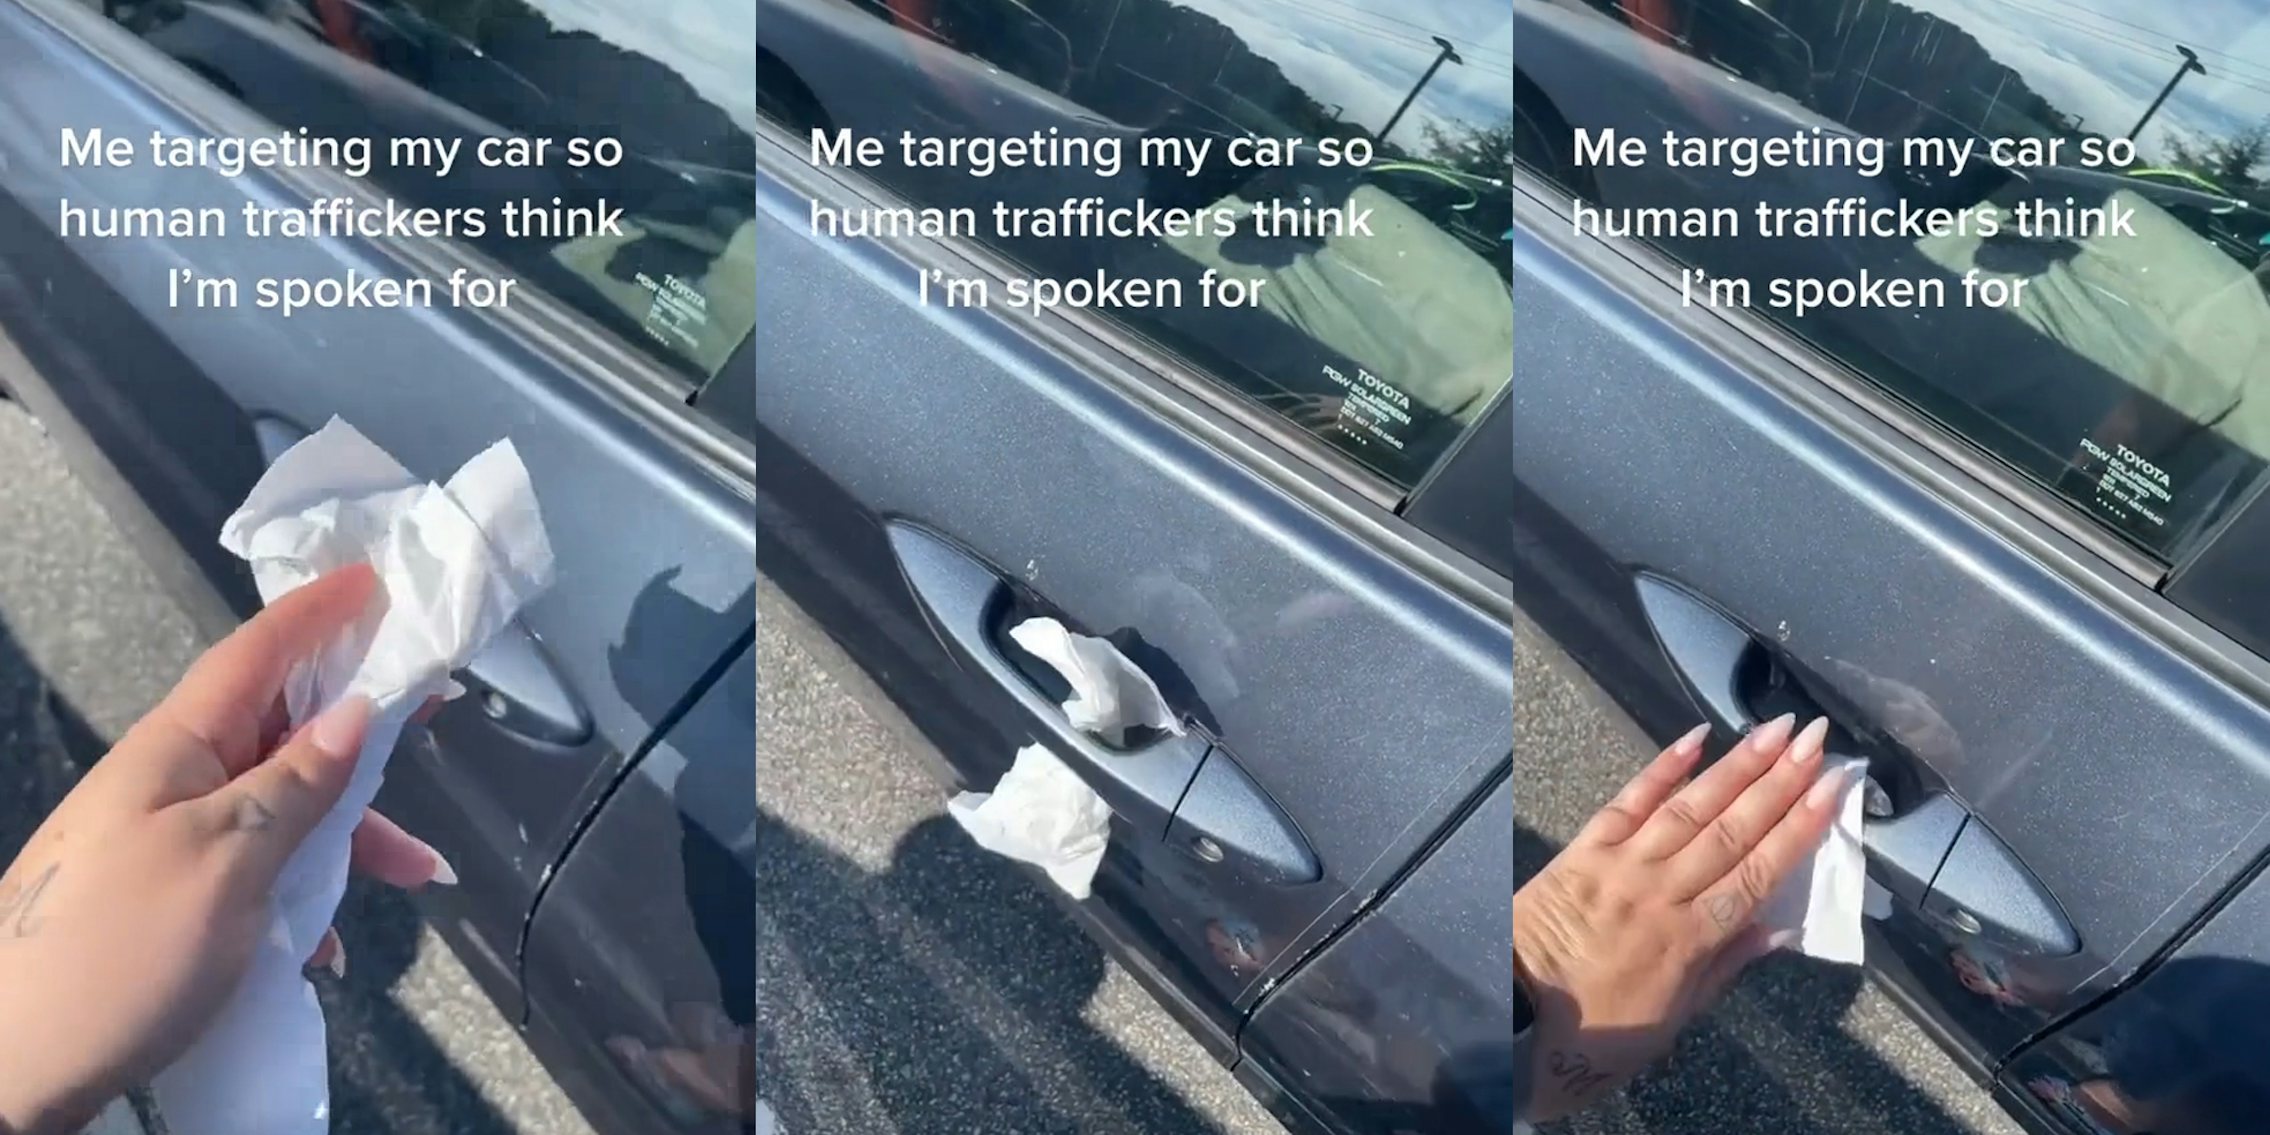 woman holding napkin next to car door handle with caption 'Me targeting my car so human traffickers think I'm spoken for' (l) napkin in car door handle with caption 'Me targeting my car so human traffickers think I'm spoken for' (c) woman placing napkin next to car door handle with caption 'Me targeting my car so human traffickers think I'm spoken for' (r)